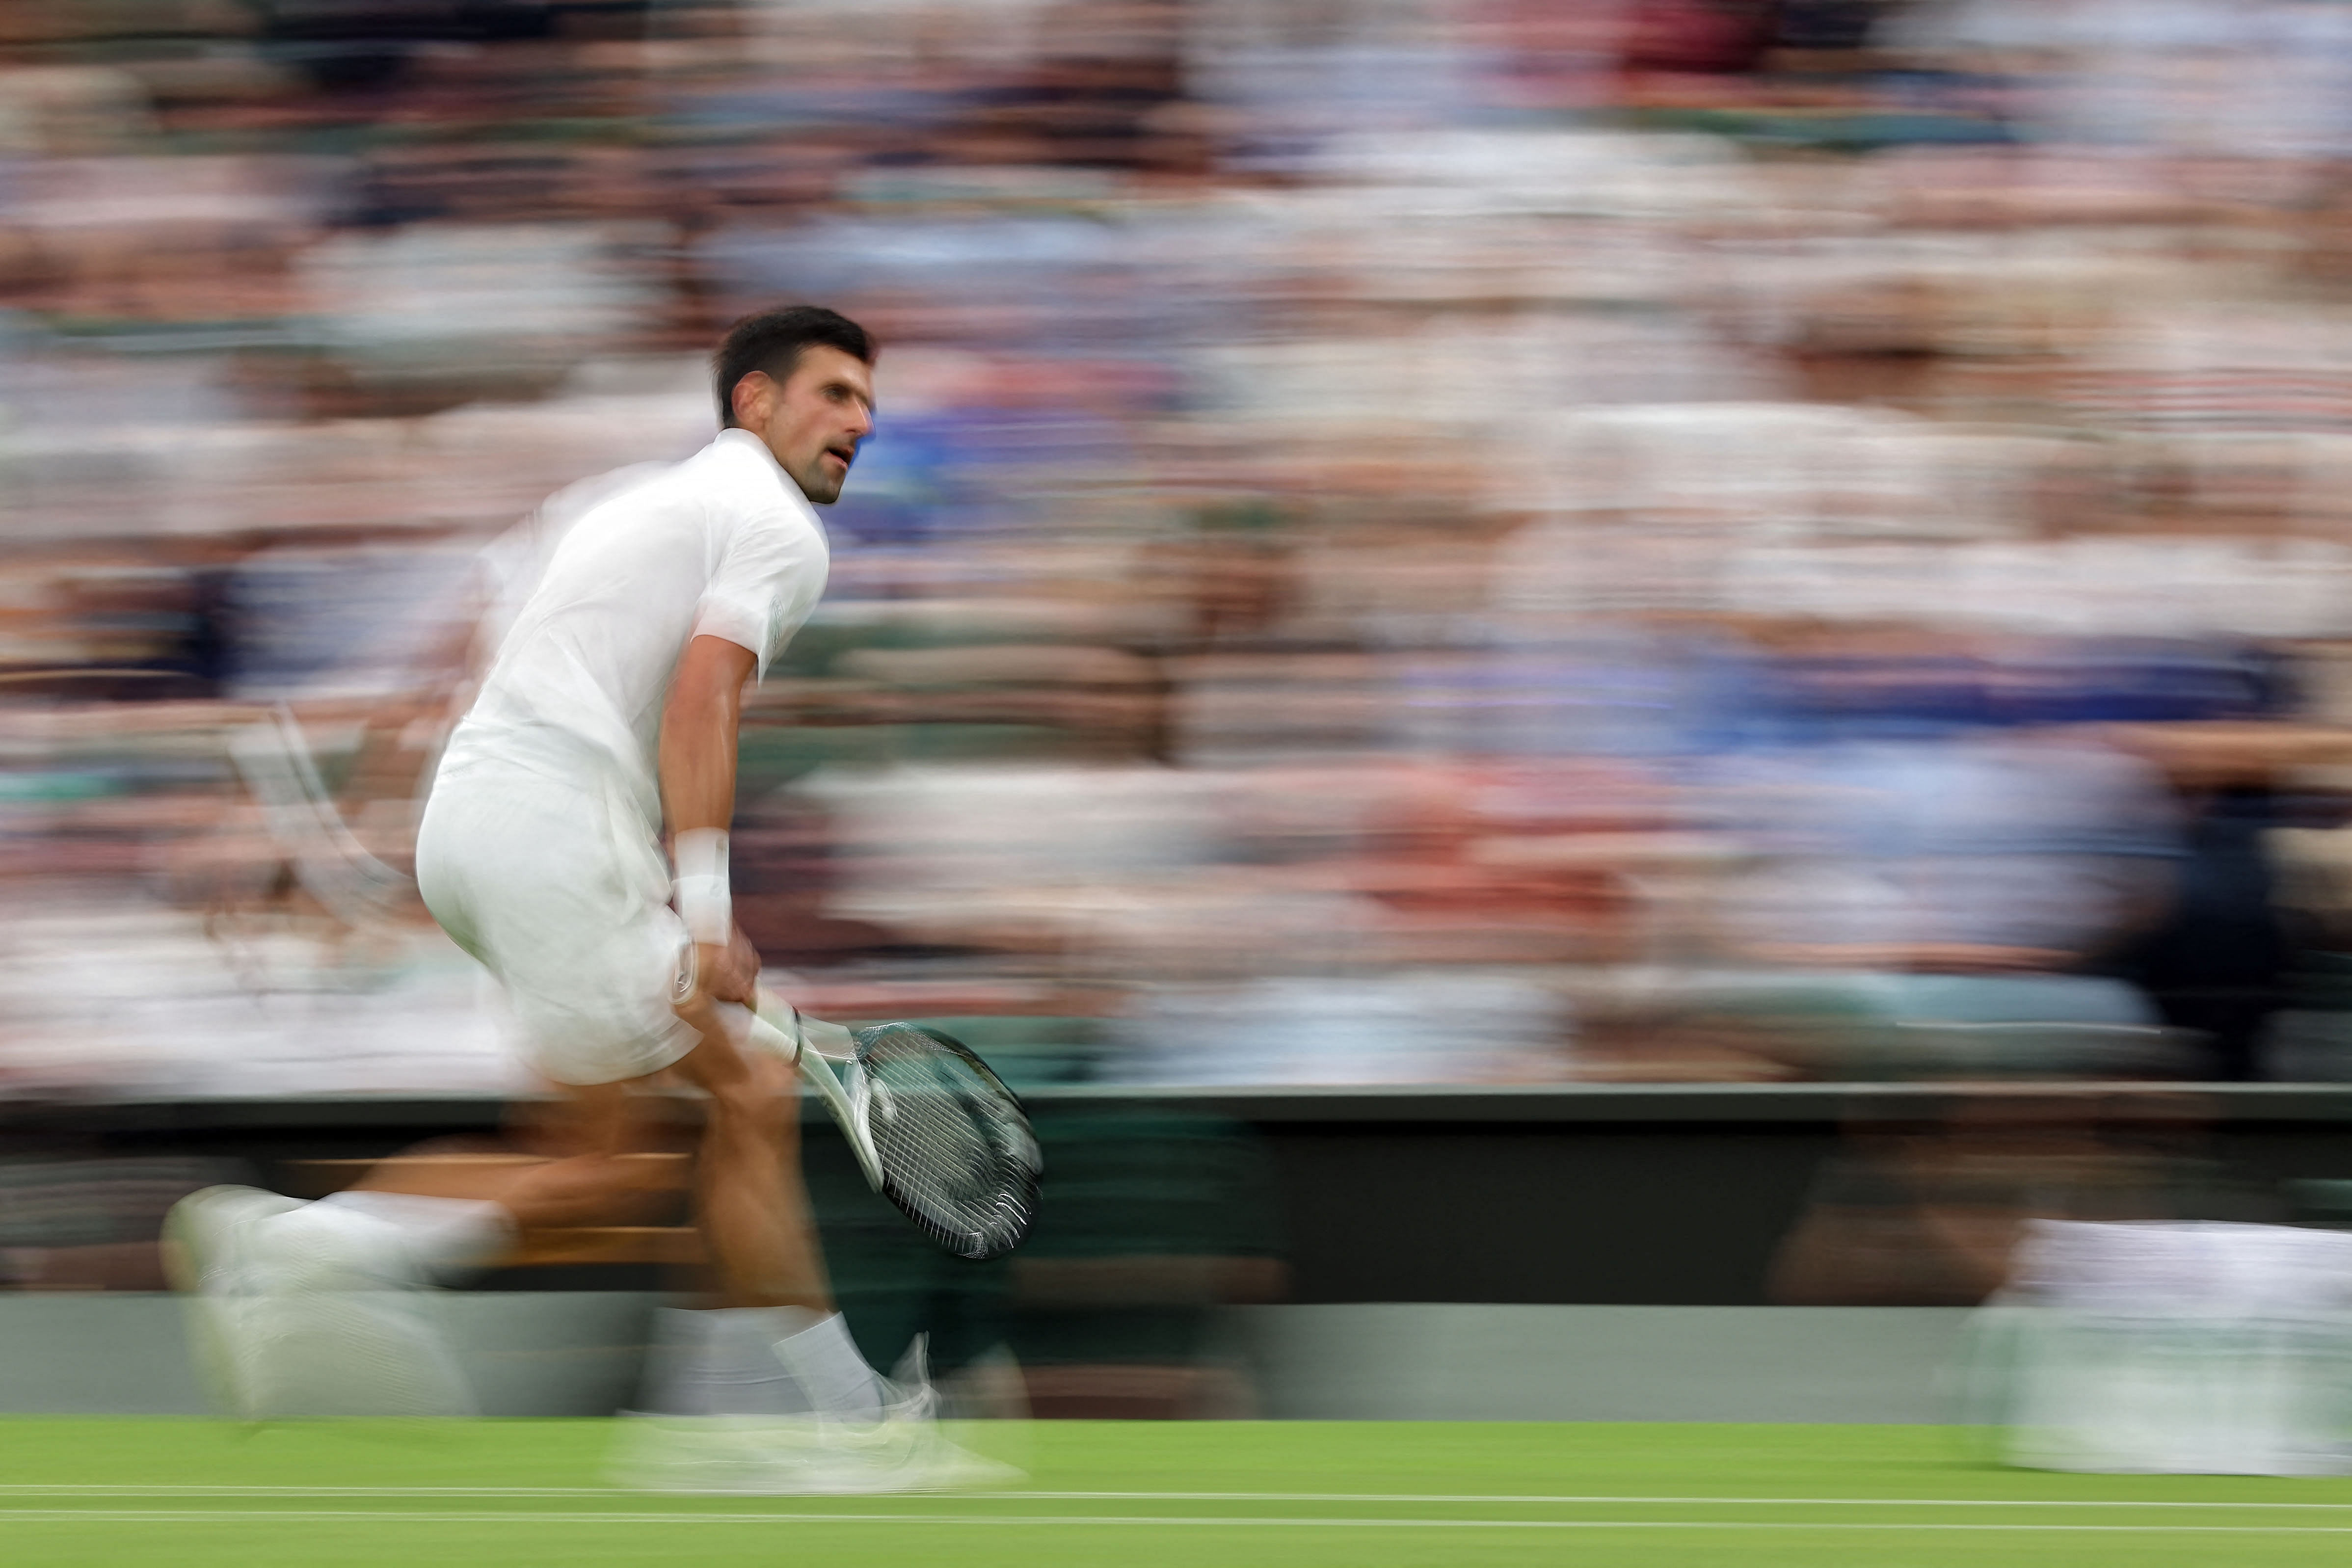 Serbia's Novak Djokovic returns the ball to South Korea's Kwon Soon-woo during their men's singles tennis match on the first day of the 2022 Wimbledon Championships at The All England Tennis Club in Wimbledon, southwest London. Credit: AFP Photo